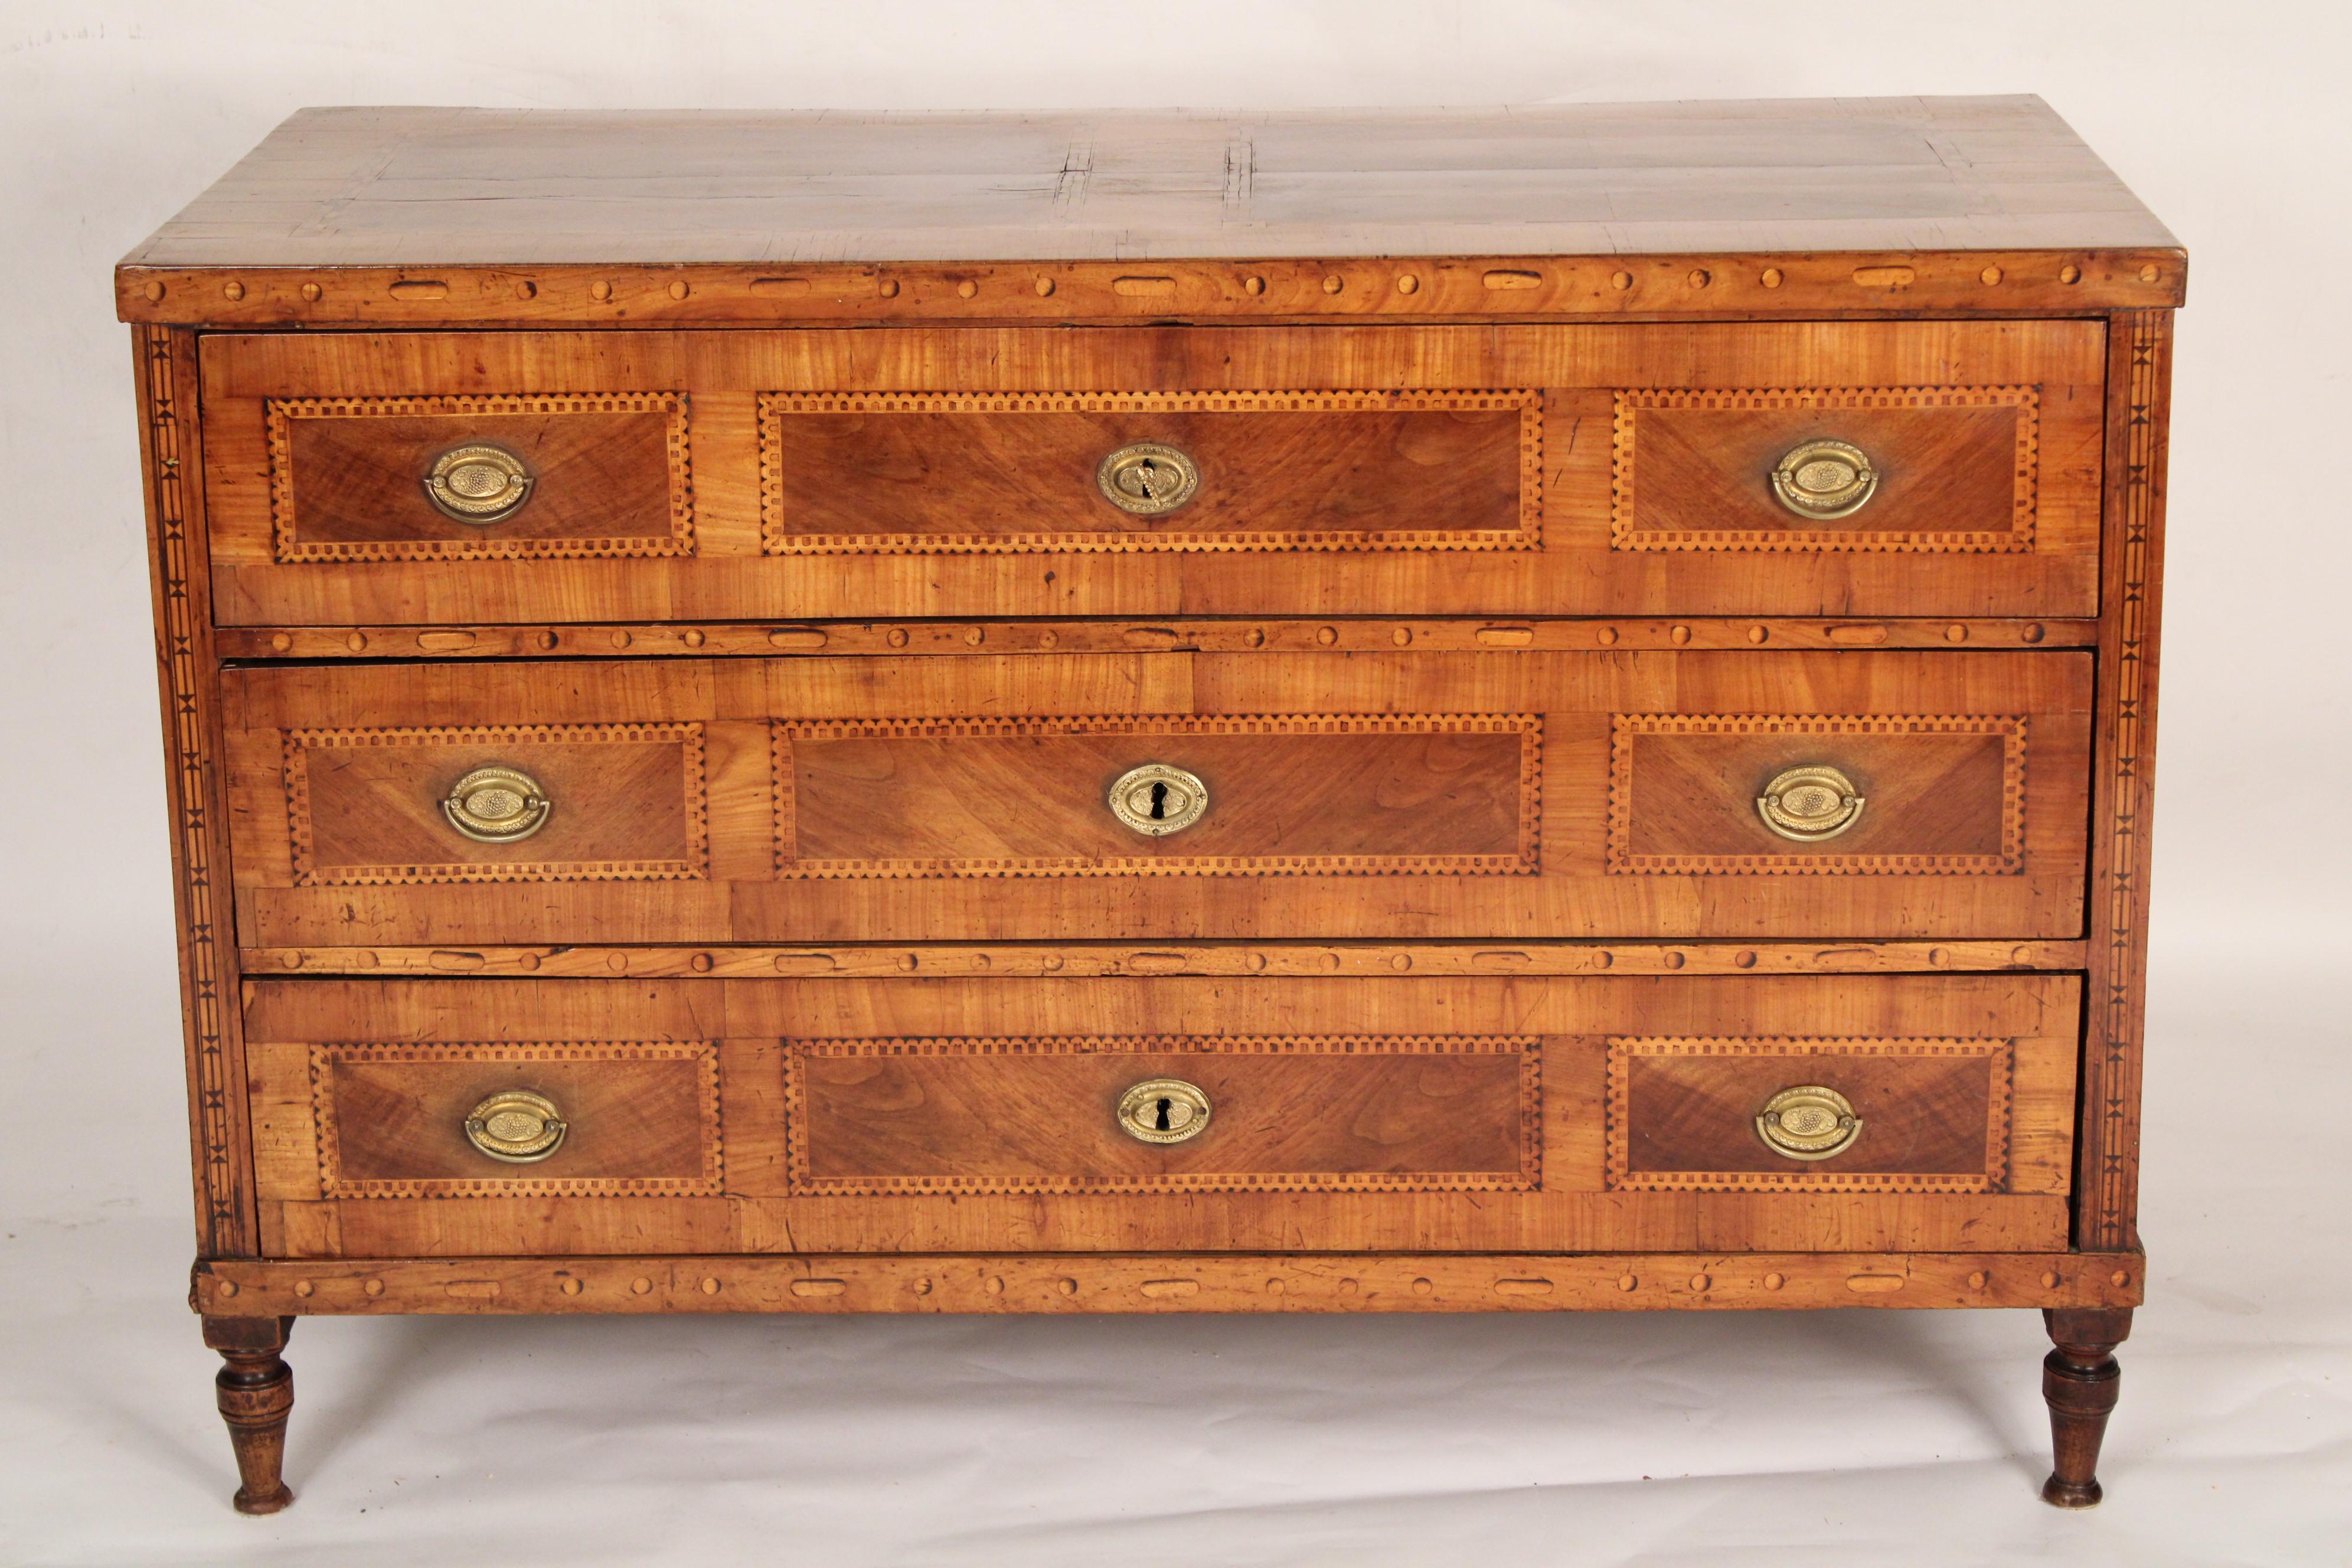 Northern European neo classical inlaid birch and walnut chest of drawers, circa 1825. The rectangular top with inset book matched walnut panels with birch framing. The three drawers with walnut panels and birch framing, resting on turned feet. Old